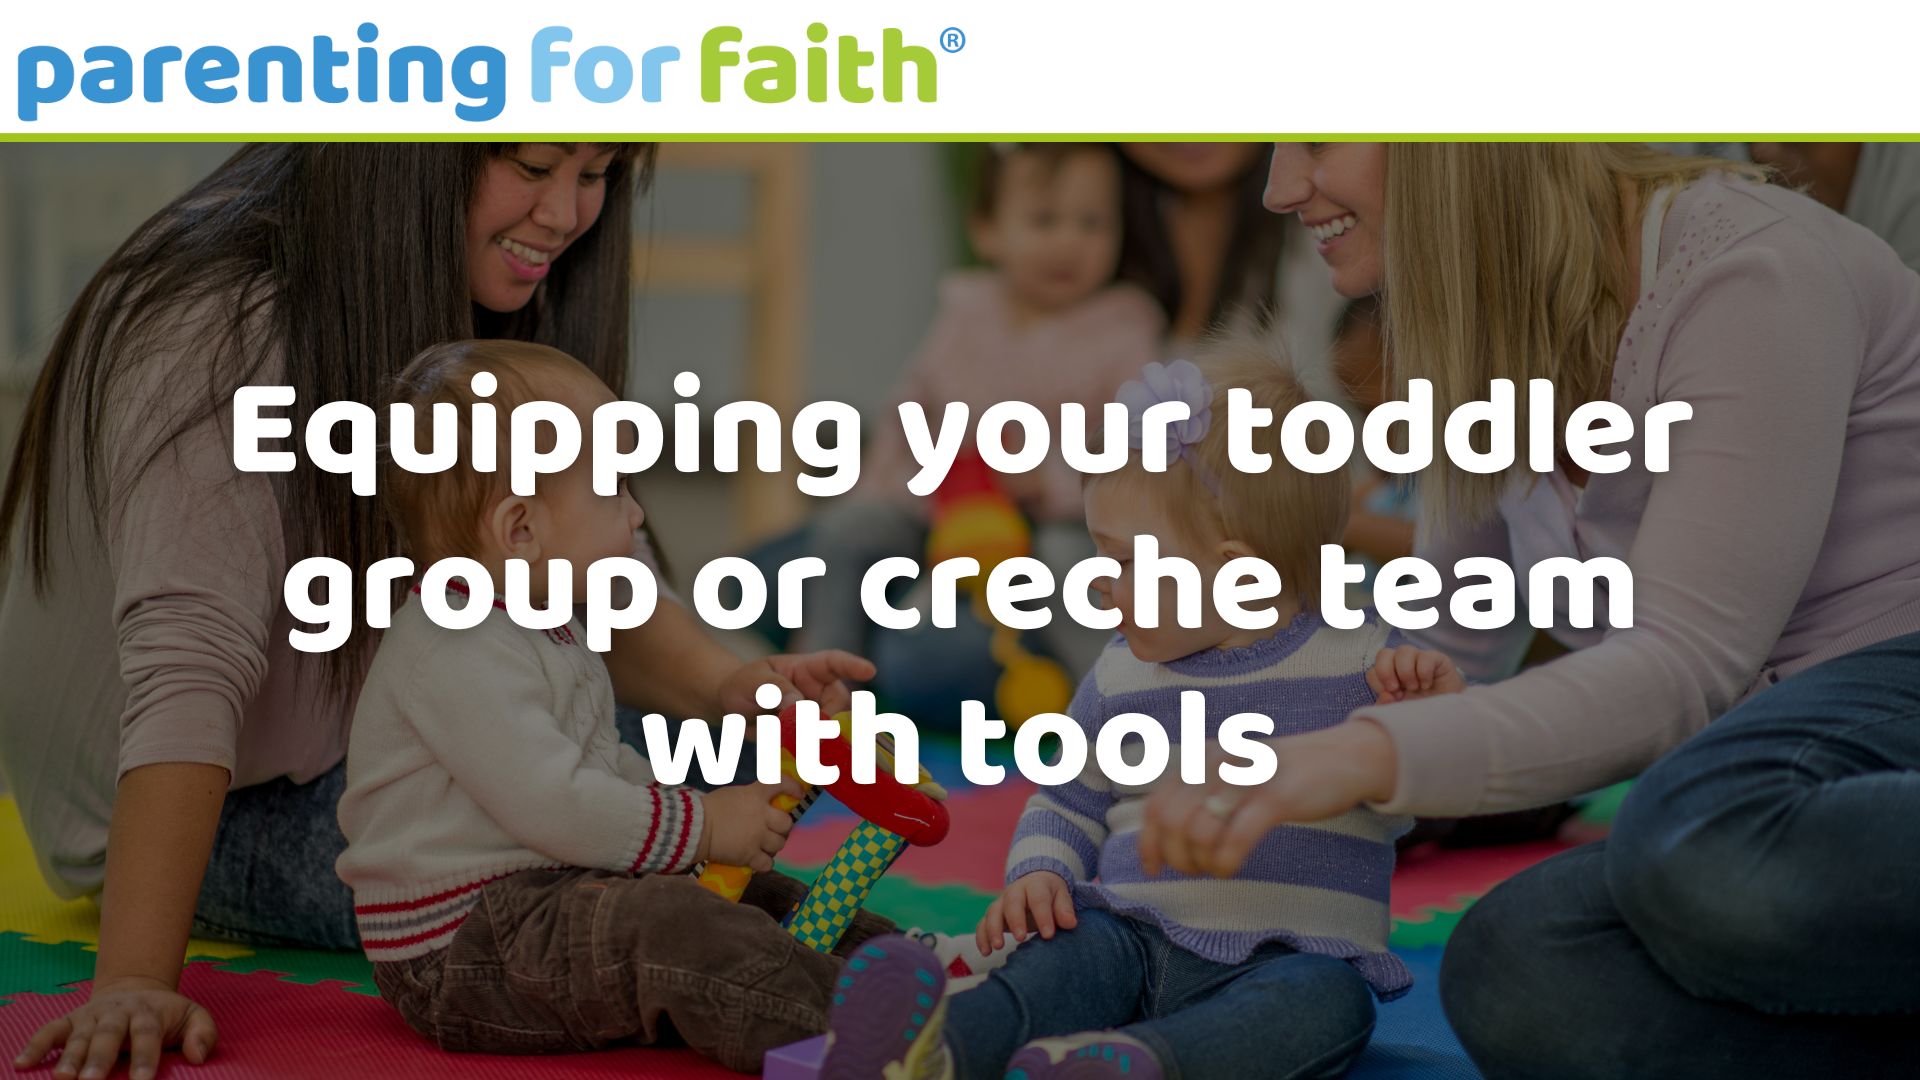 Equipping your toddler group or creche team with tools Image credit Fat Camera from Getty Images Signature